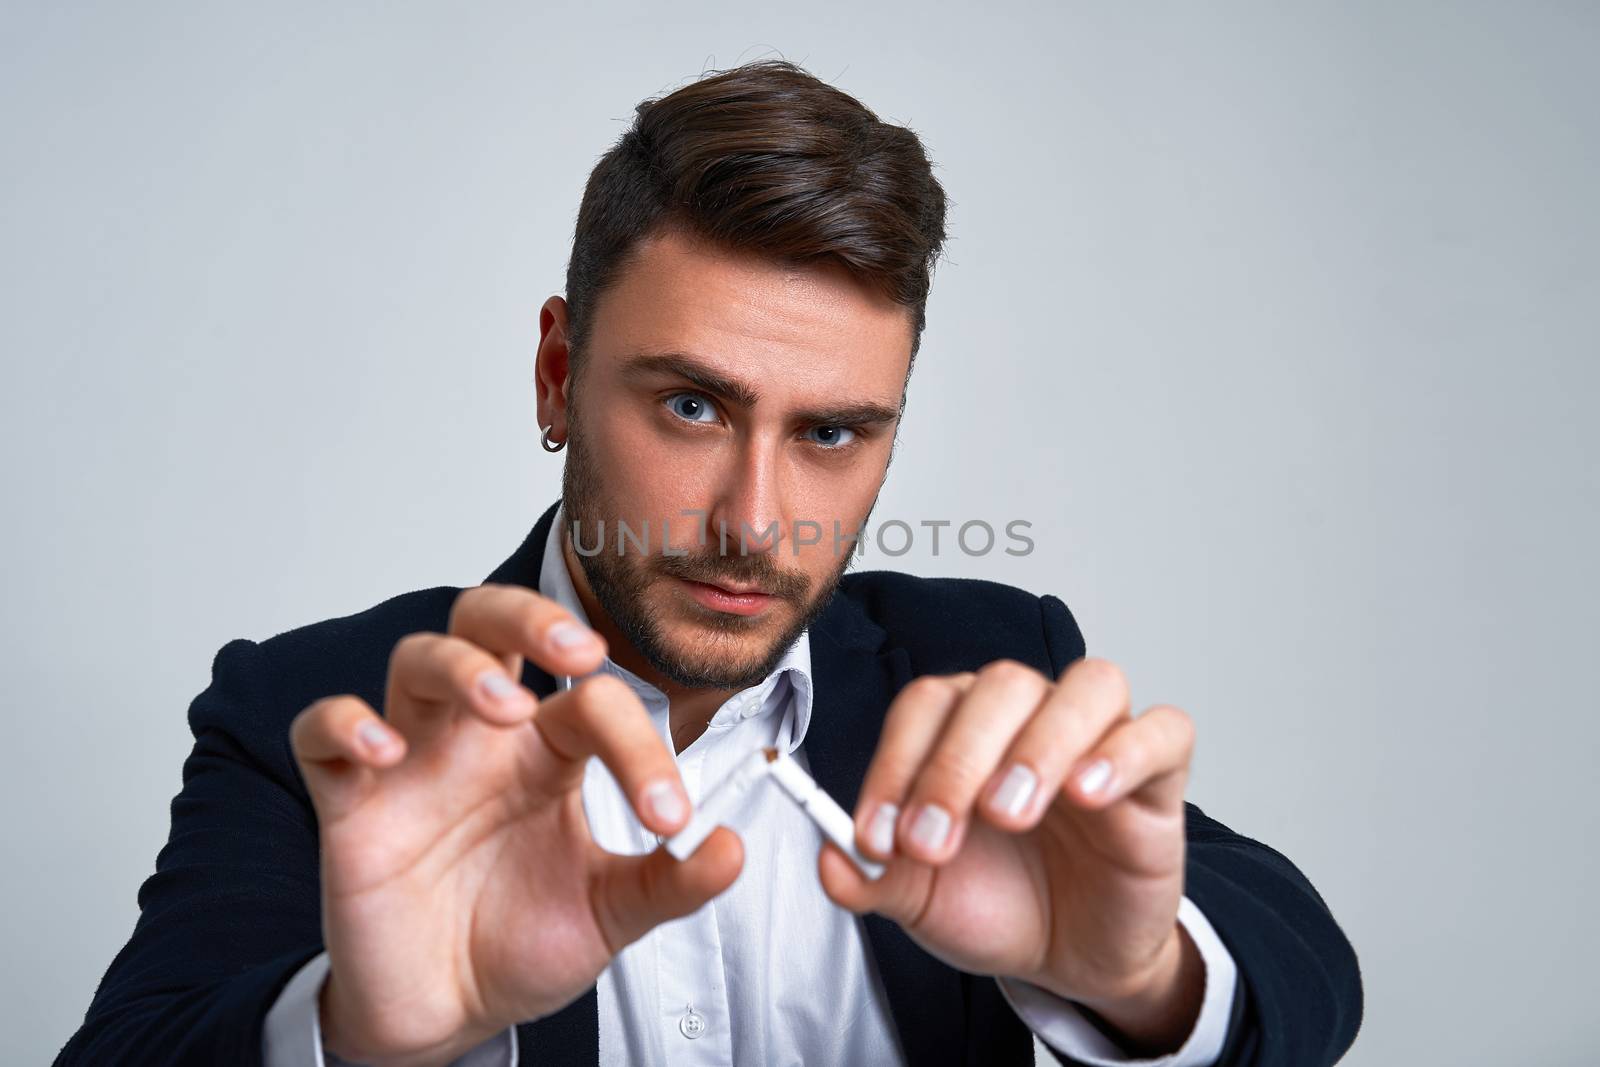 Businessman Business person. Man business suit studio gray background. Modern person breaks a cigarette stopped smoking Portrait of charming successful young entrepreneur